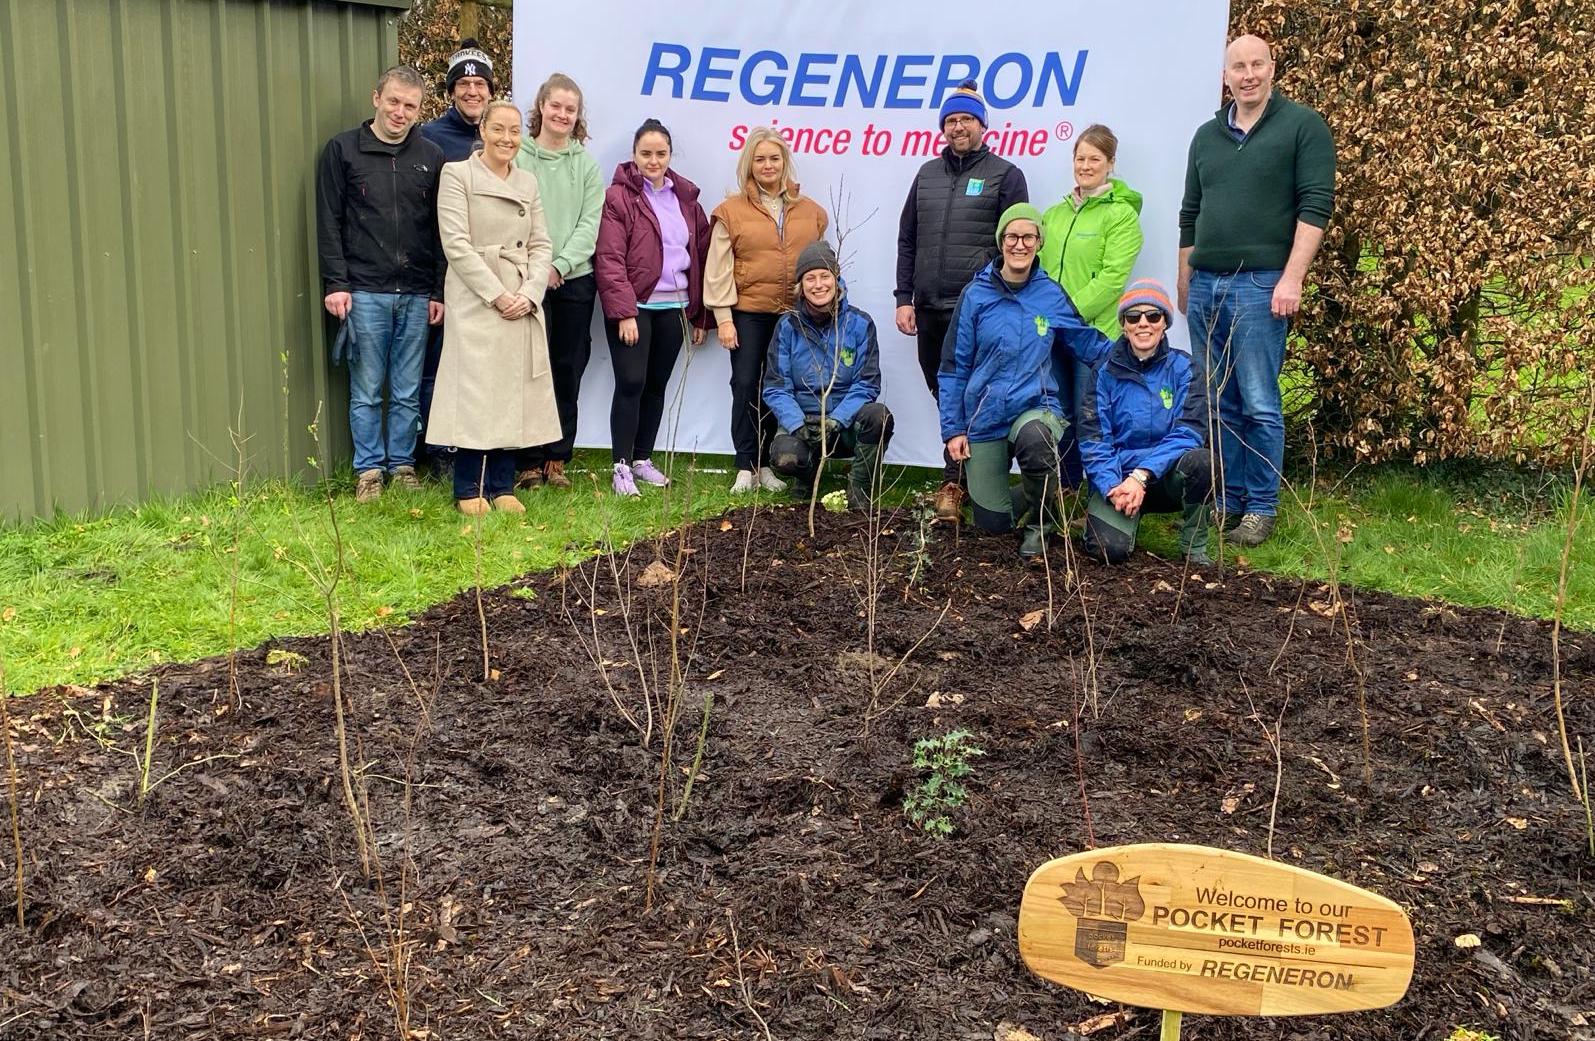 Regeneron Pocket Forests and NOVAS recently partnered to create a beautiful healing space at NOVAS Respite House for people whose loved ones are in addiction.